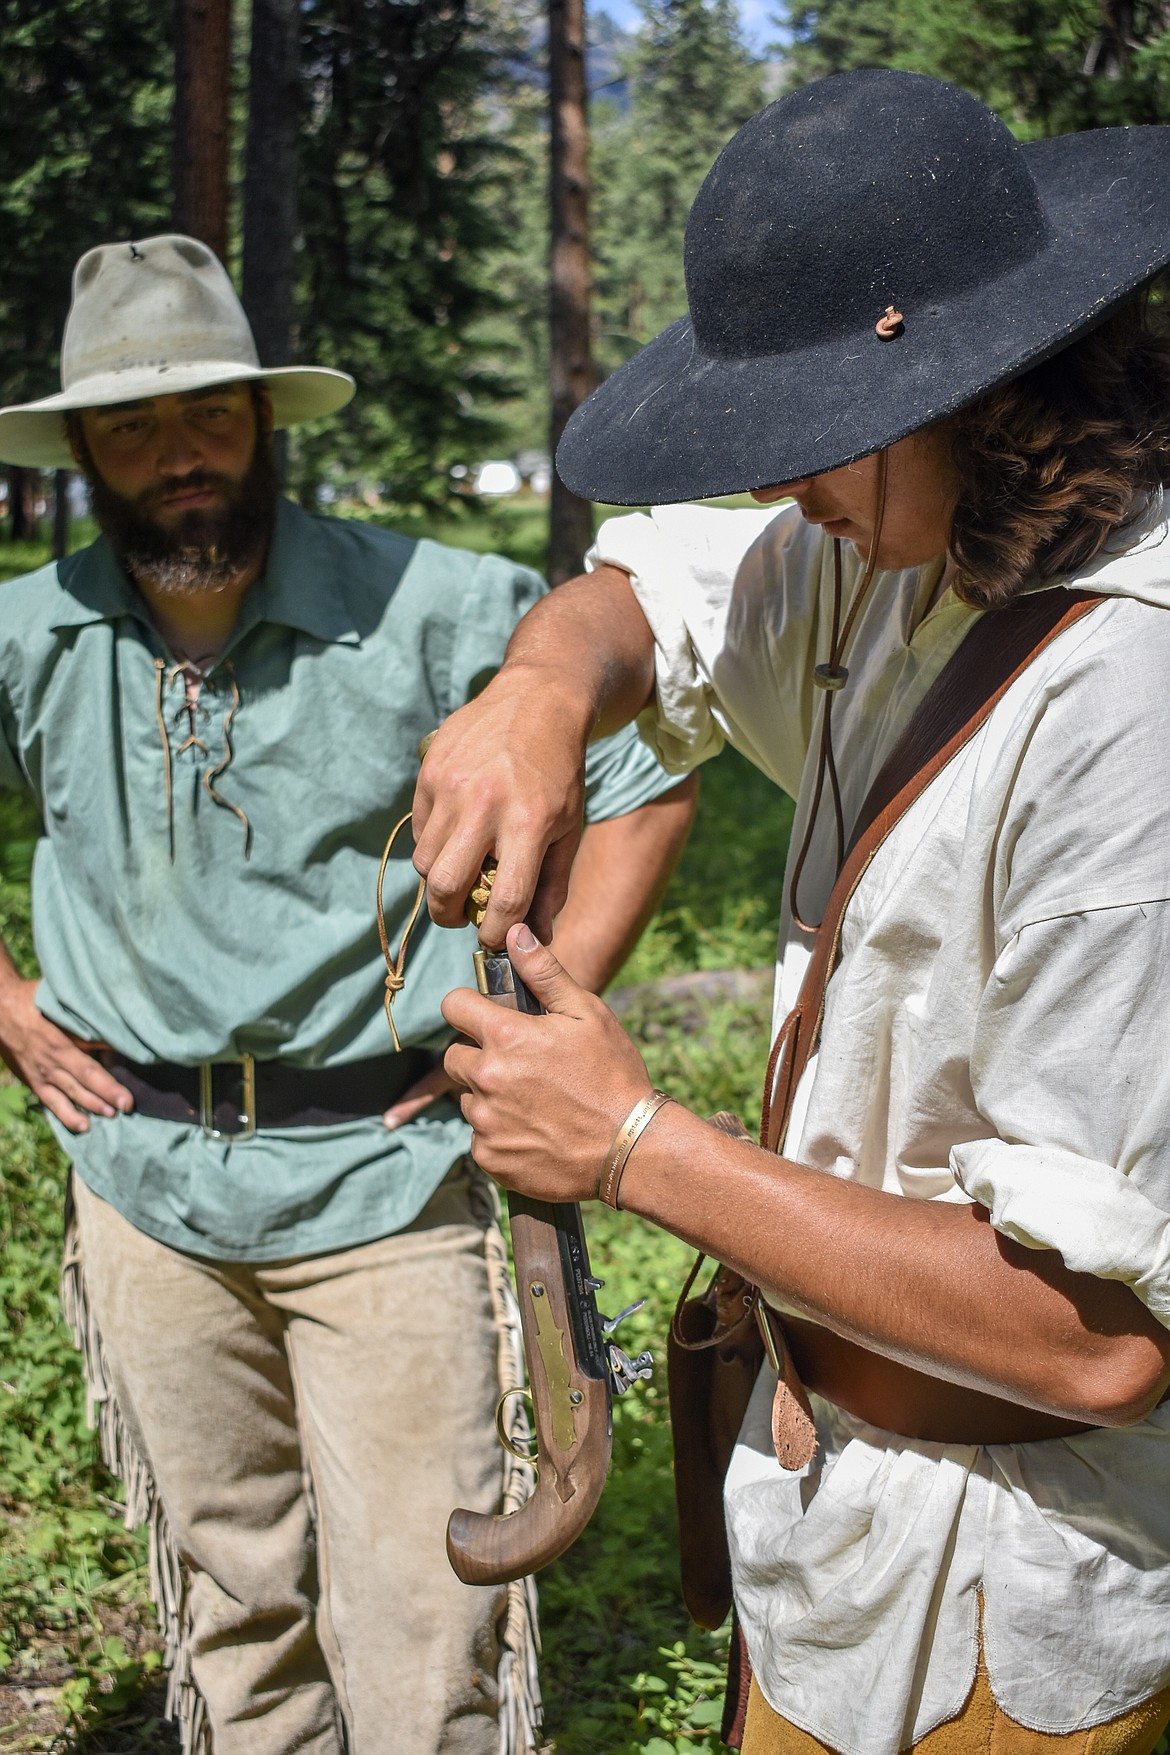 Trevor Horner loads powder into a pistol as Josh Snyder looks on during the Two Rivers Rendezvous near Libby July 14. (Ben Kibbey/ The Western News)